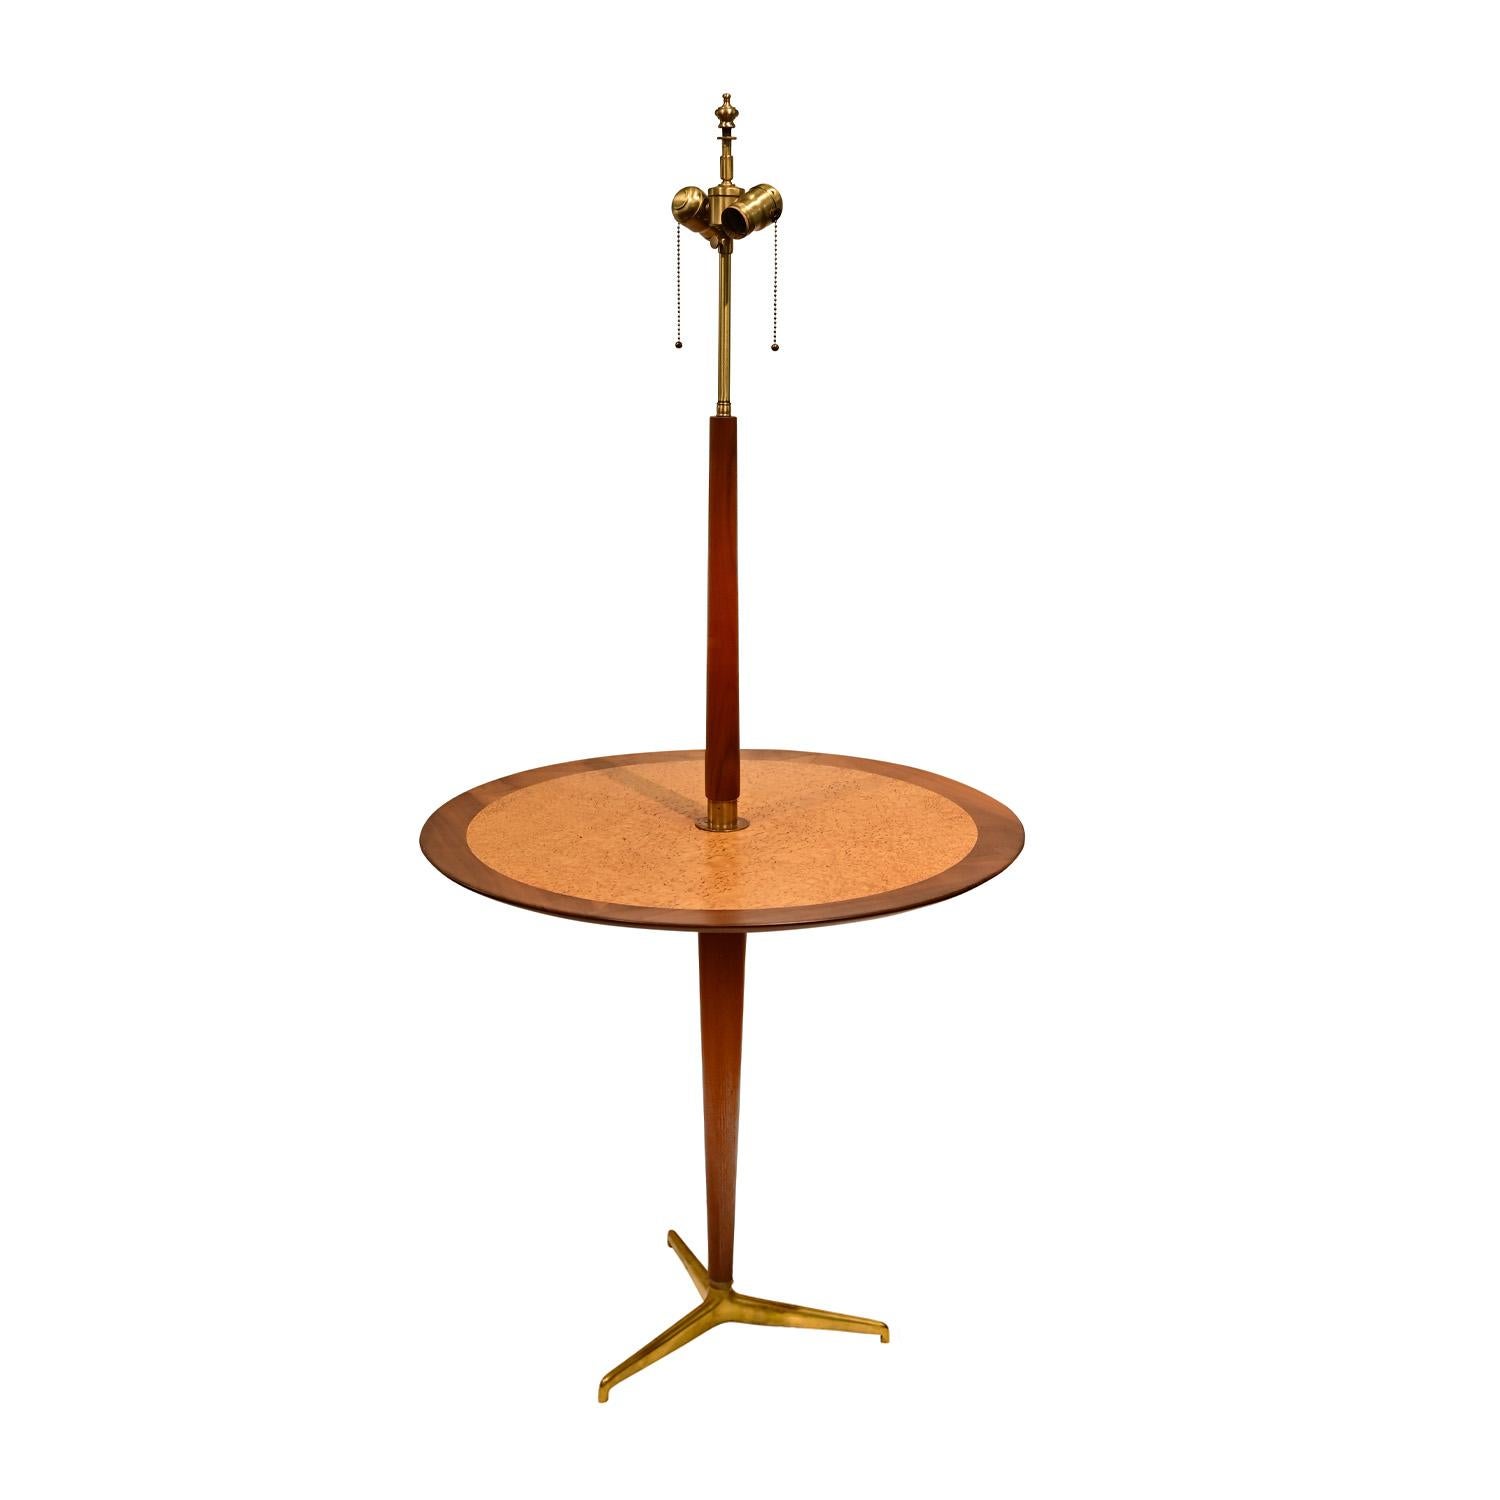 Mid-Century Modern Edward Wormley for Dunbar Floor Lamp with Incorporated Table 1954 (Signed) For Sale